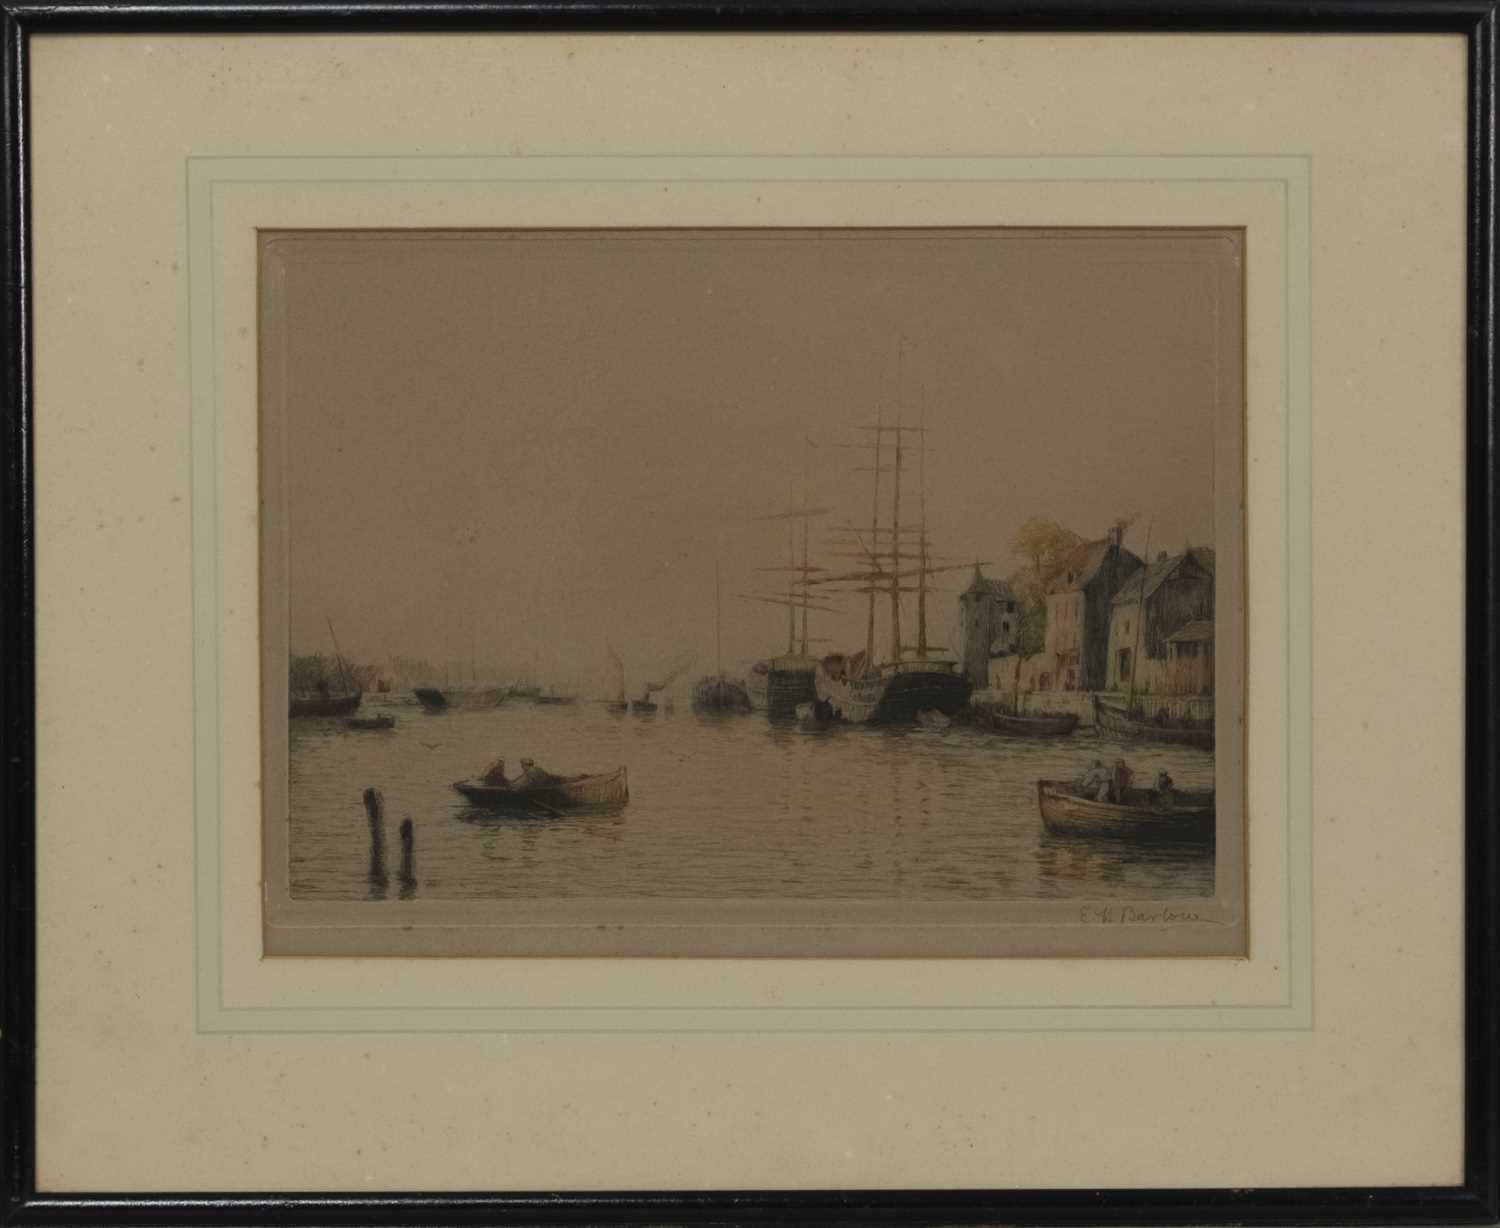 Lot 509 - BOATS AT THE DOCK, AN ETCHING BY E H BARLOW